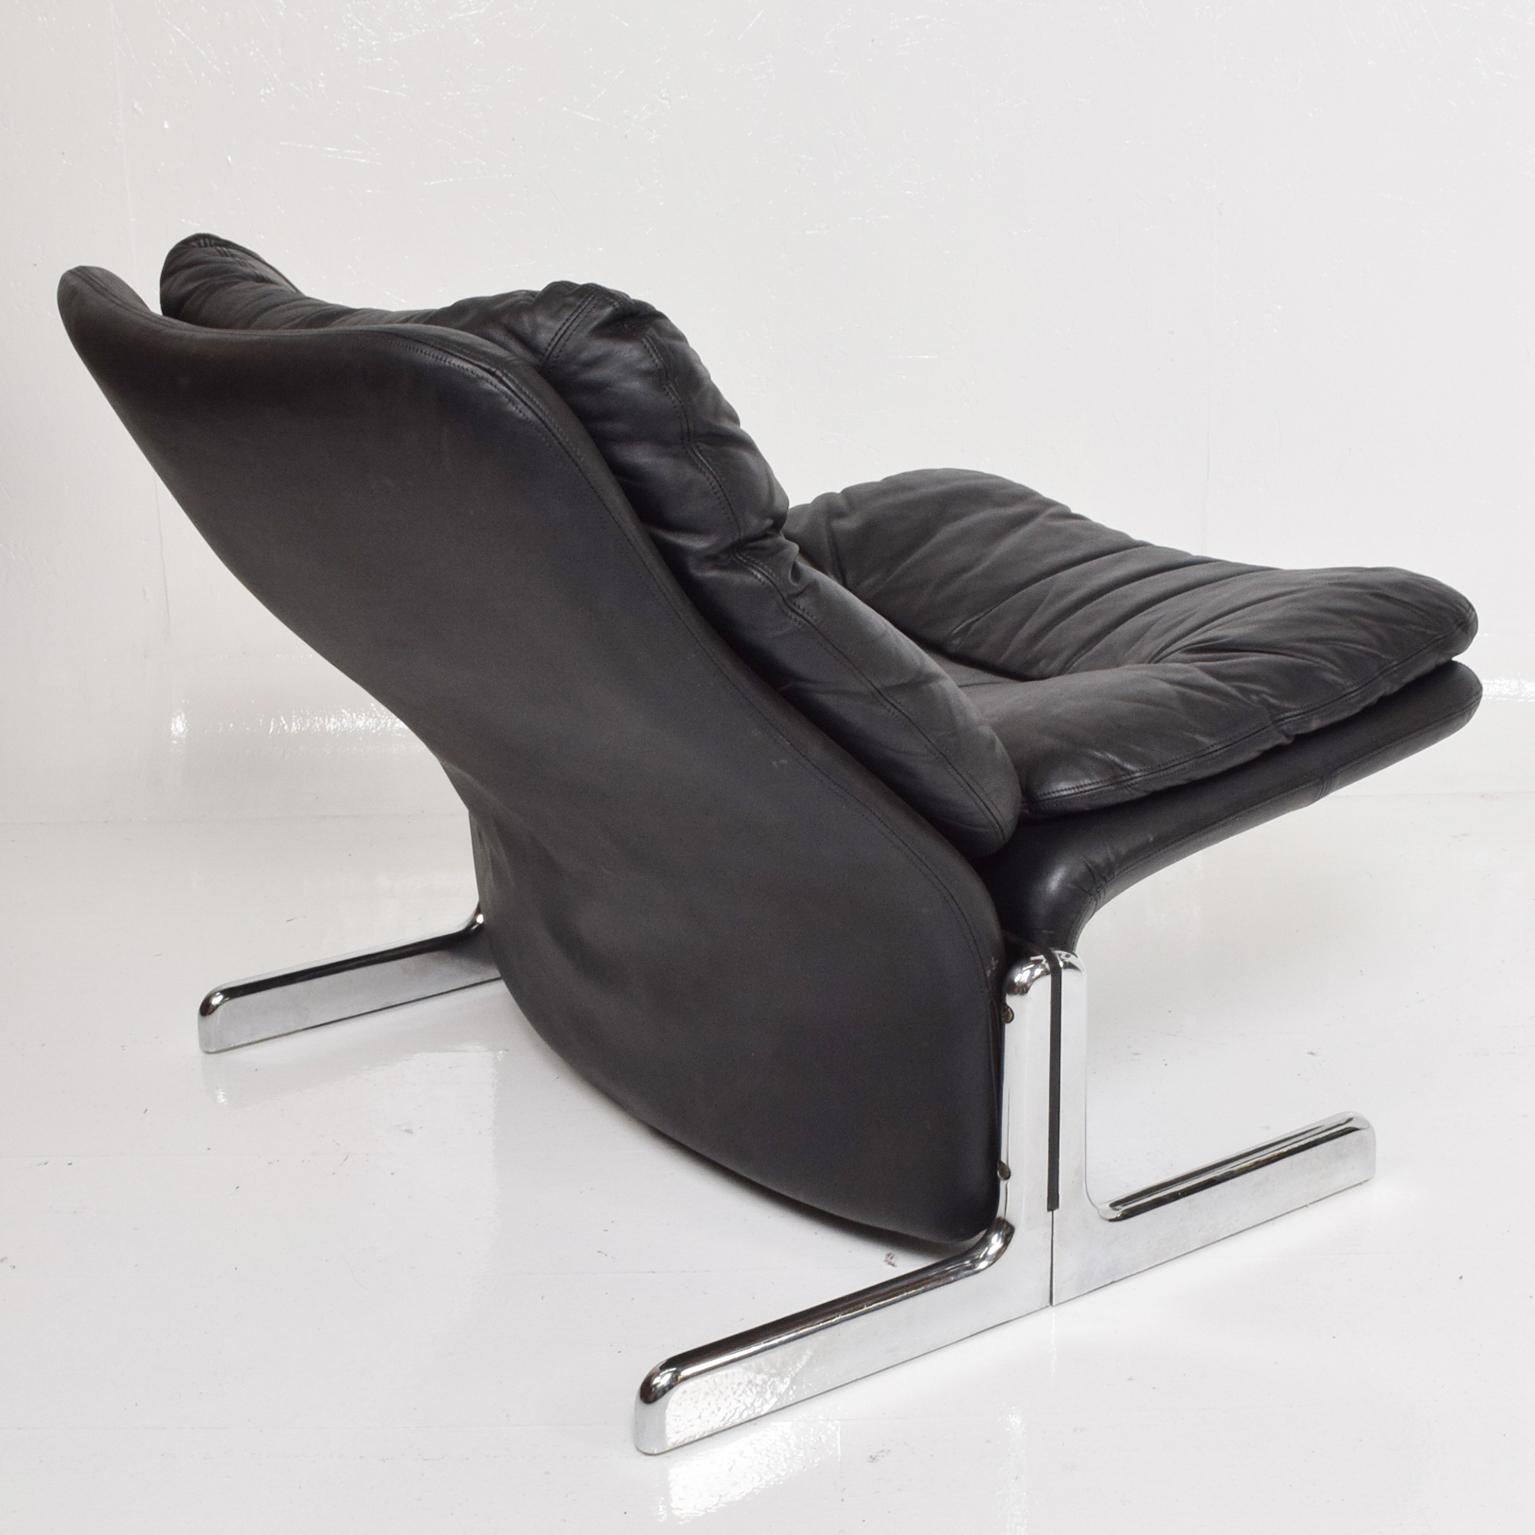 Sumptuous black leather lounge chair and ottoman modern flat chrome base by Ammannati & Vitelli Modern Italy 1970s.
Maker label is present, designers Tittina Ammannati & Vitelli Giampiero
Leather & Chrome Plated Steel.
Dimensions: Chair 28.5 H x